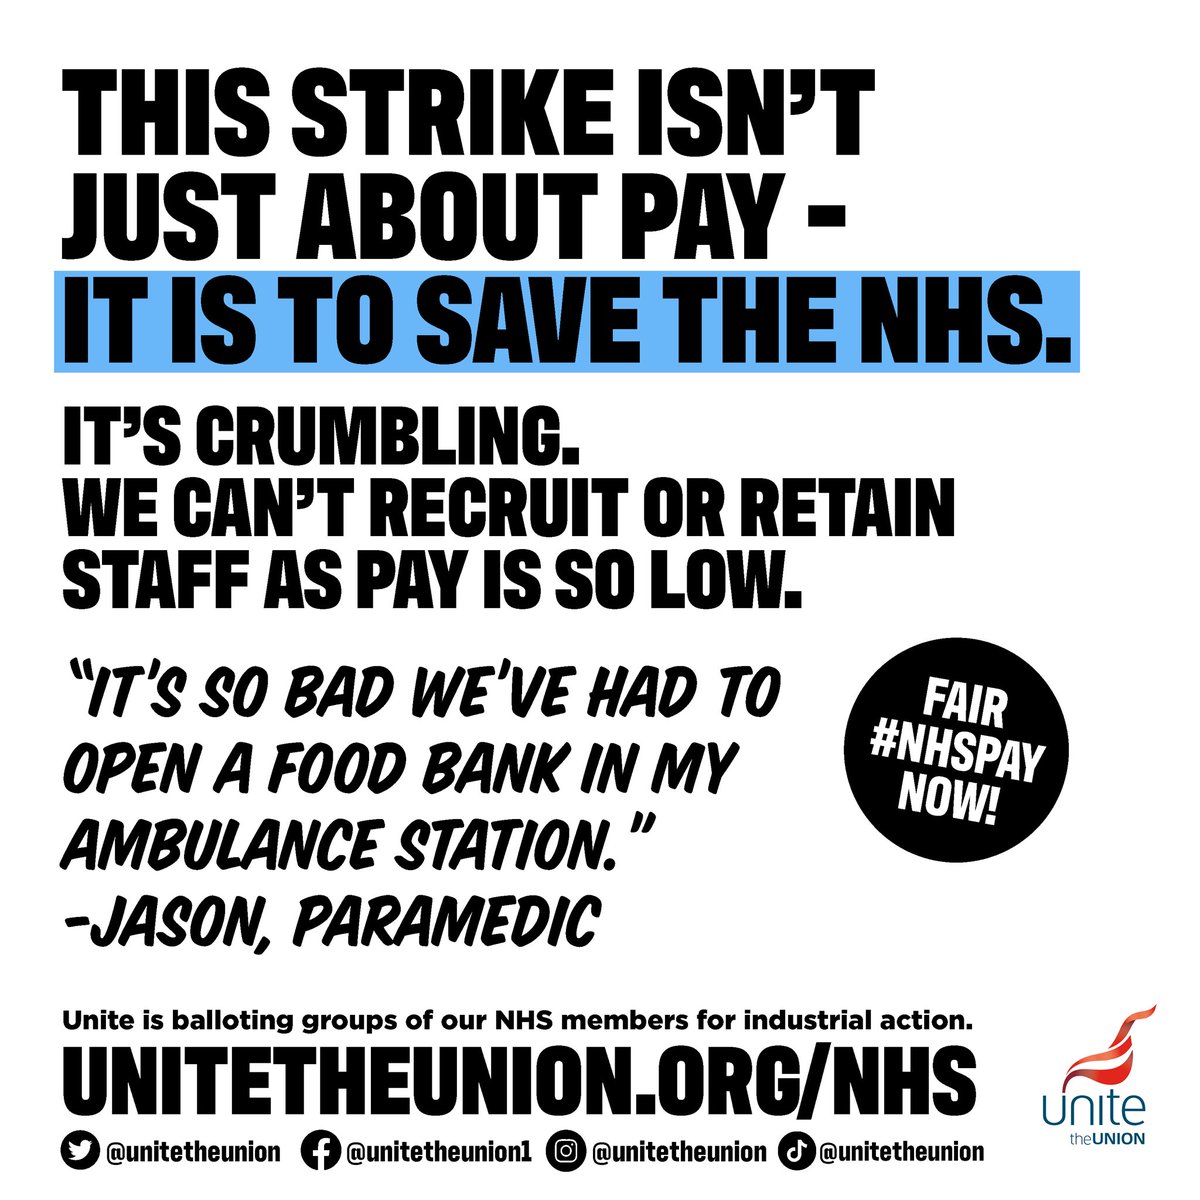 “This strike isn’t just about pay - it is to save the NHS. The NHS is crumbling, we can’t recruit and retain staff as pay is so low. It has got so bad that we have had to open a food bank in my ambulance station.” Jason, a paramedic